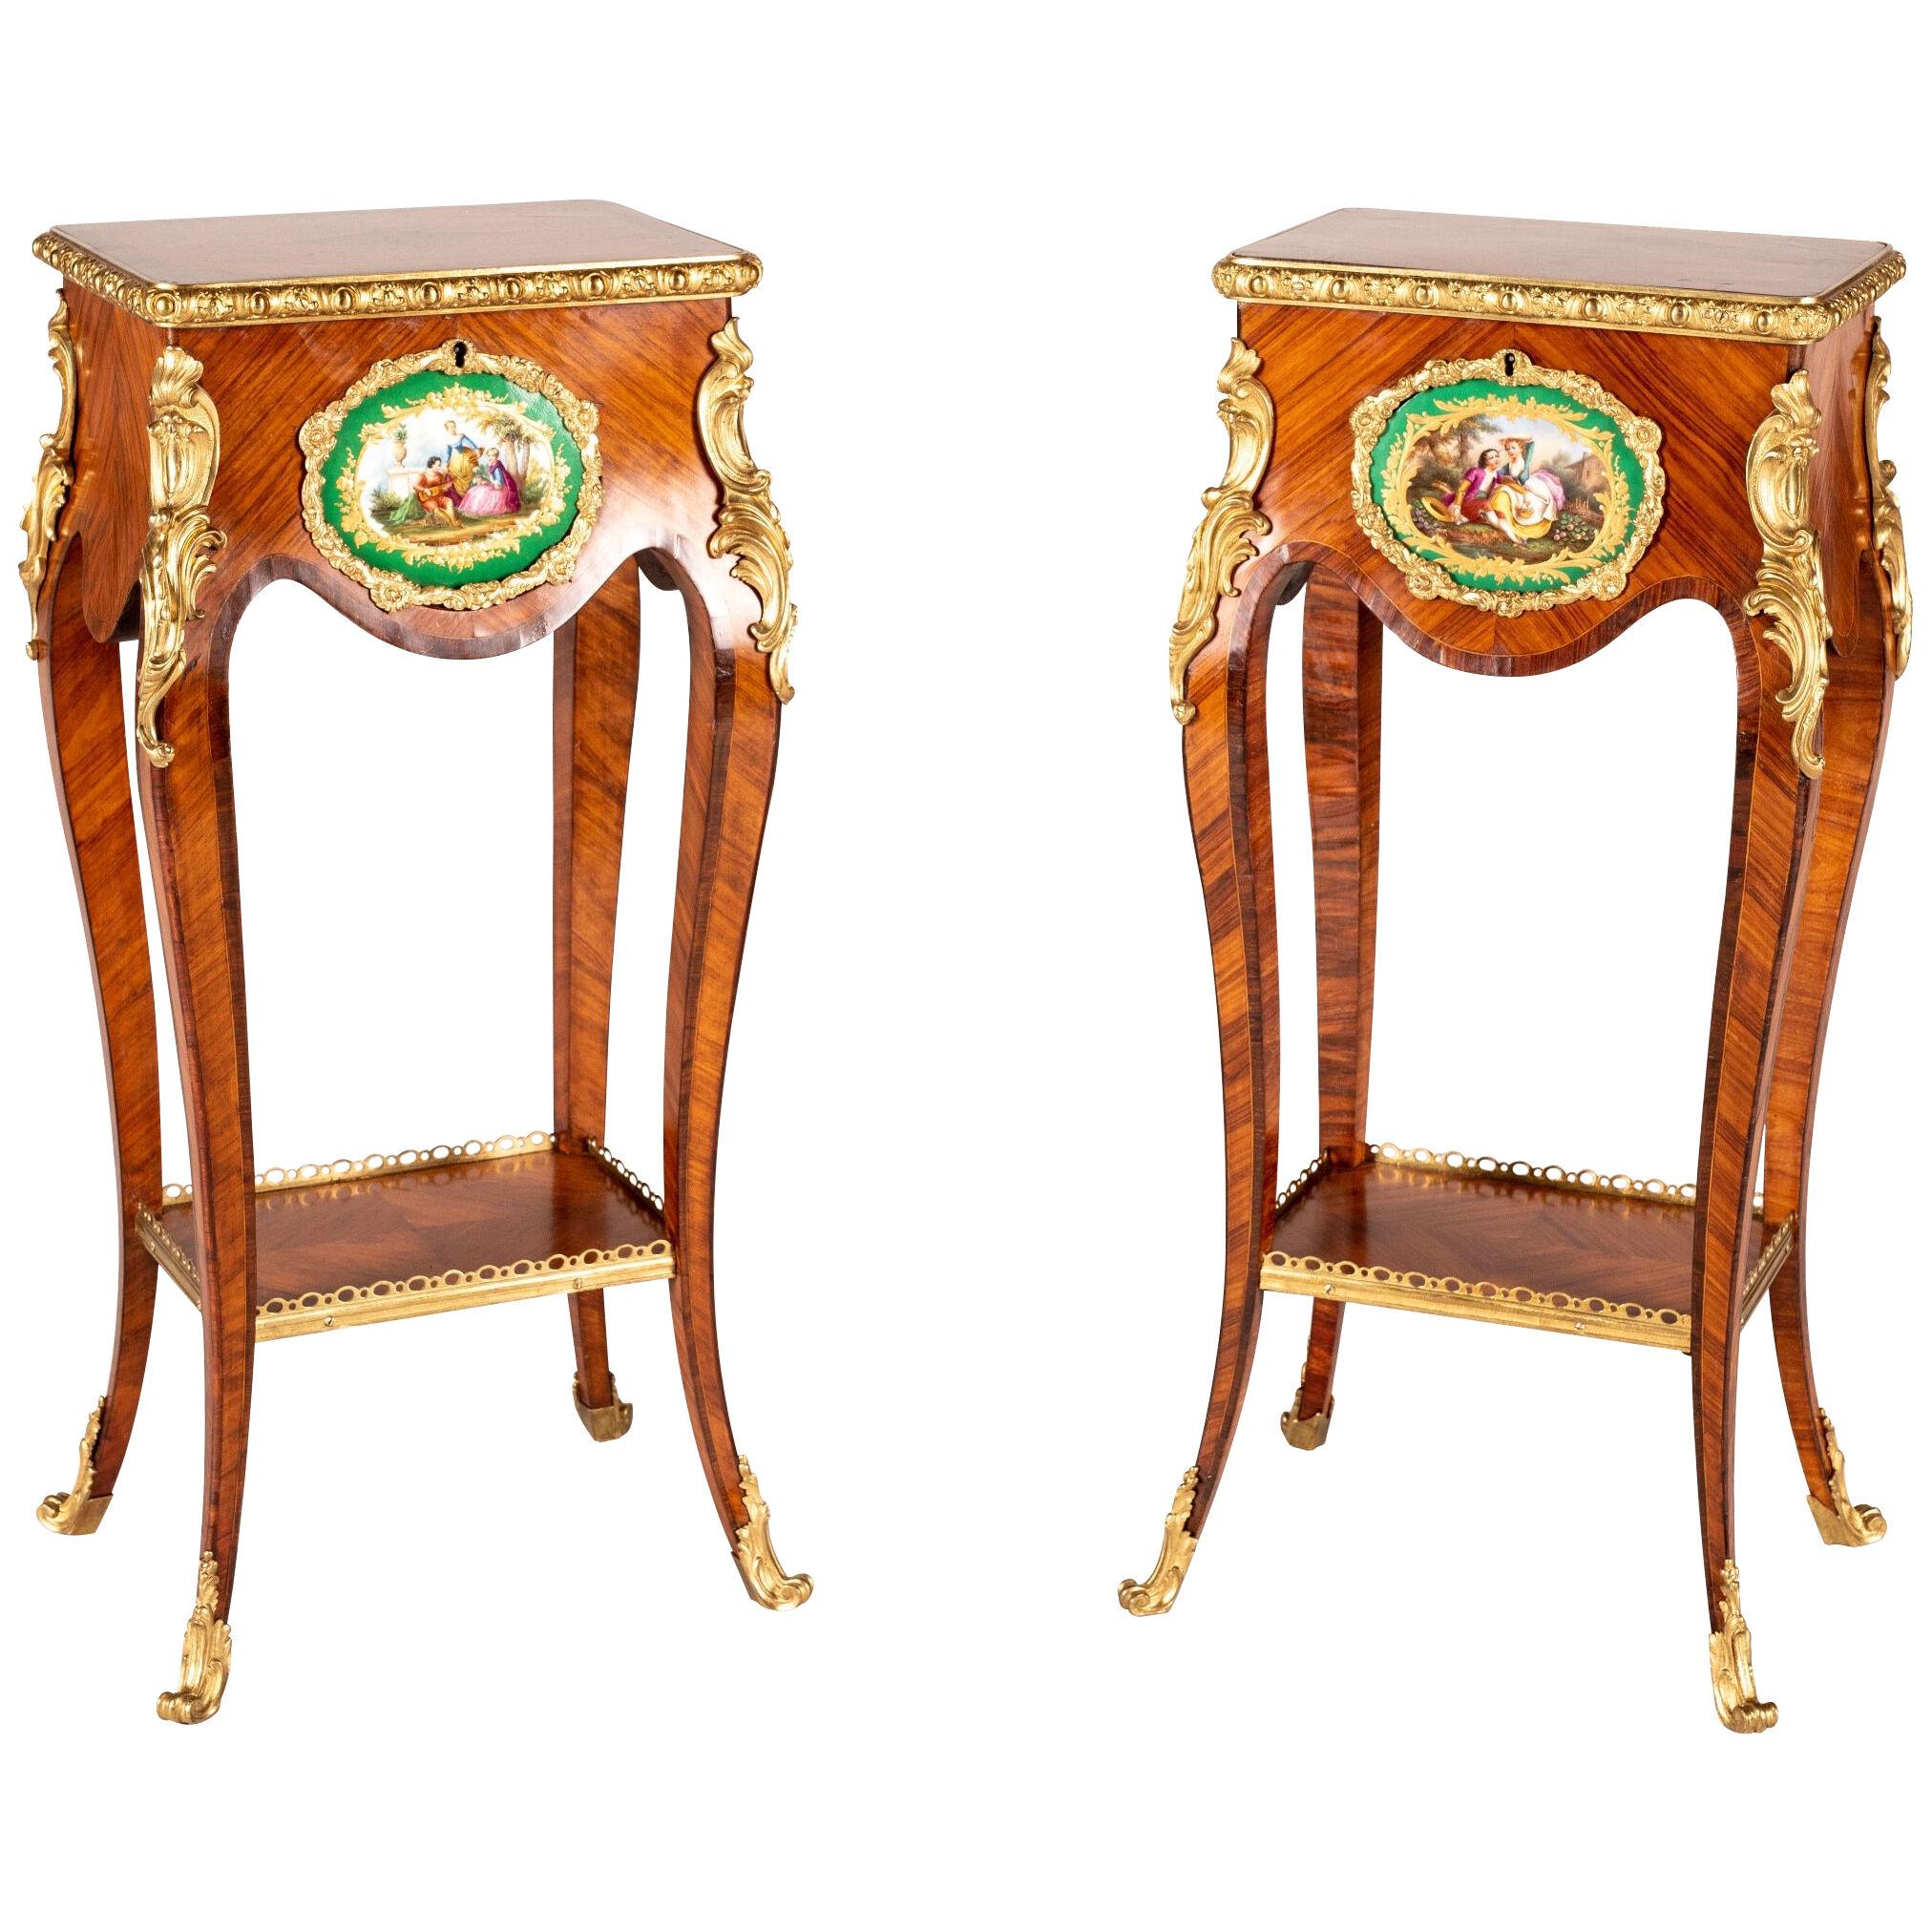 Pair of Occasional Tables in the Louis XV Transitional Taste